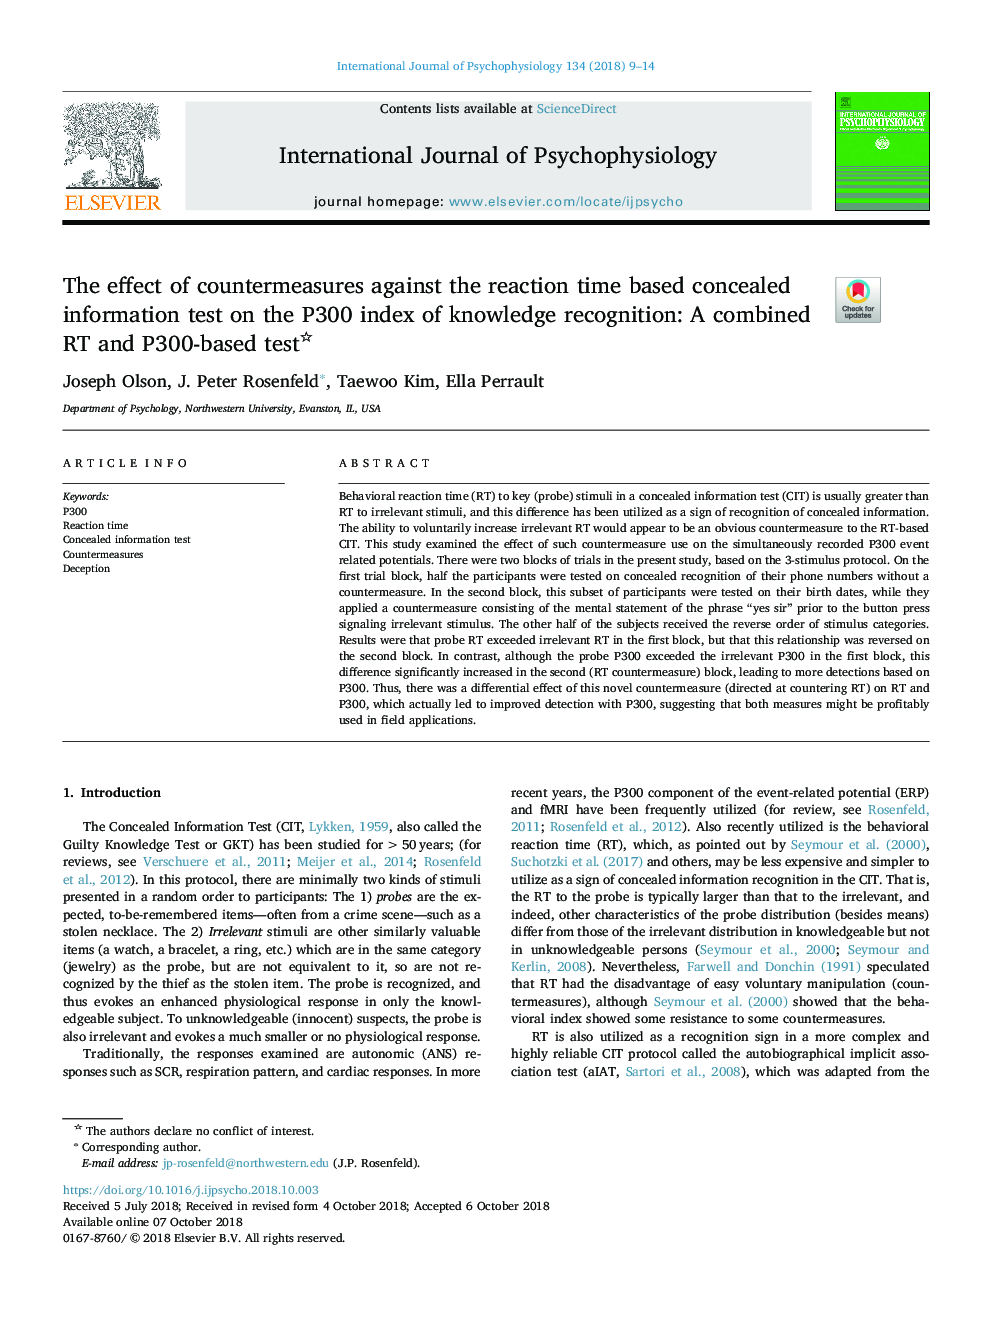 The effect of countermeasures against the reaction time based concealed information test on the P300 index of knowledge recognition: A combined RT and P300-based test